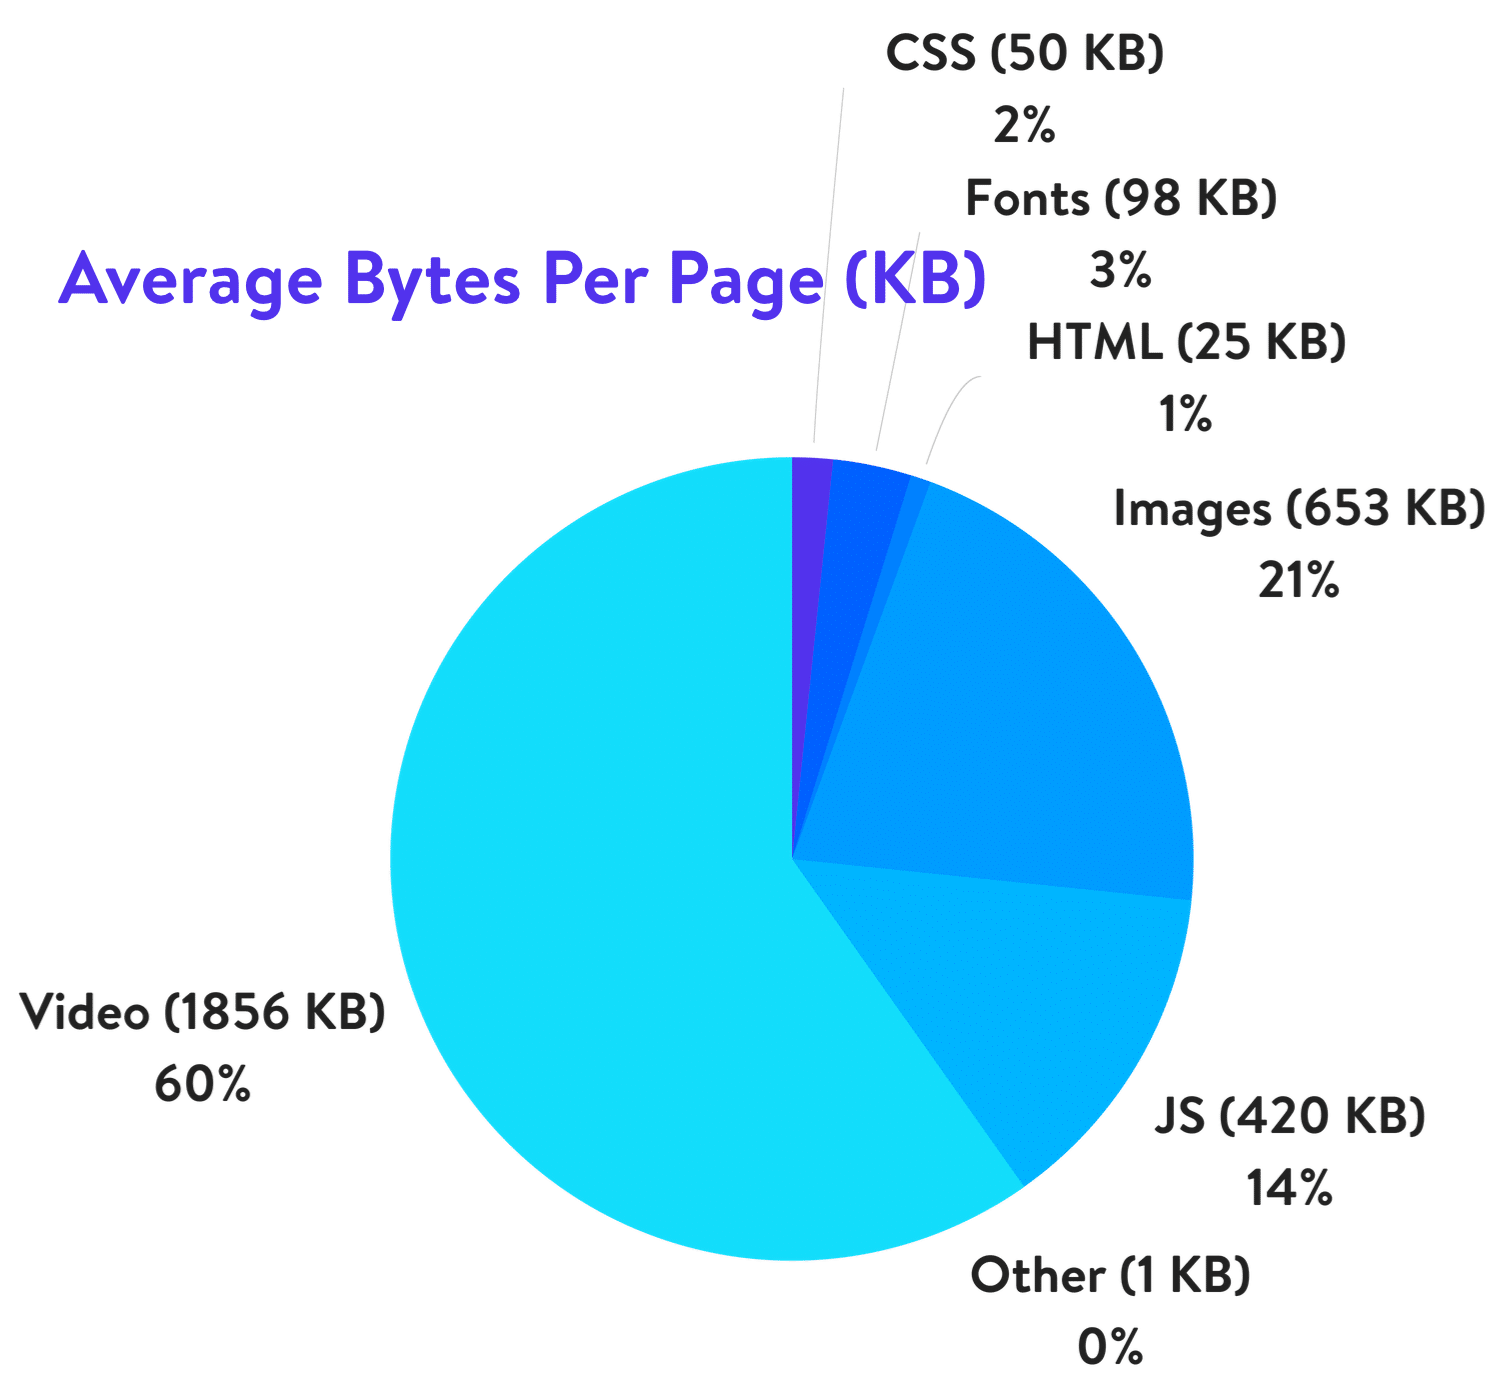 Kinsta cache component chart" width="1258" height="904" srcset="http://webypress.fr/wp-content/uploads/2019/08/1566286013_89_Comment-accelerer-votre-site-WordPress-Guide-Ultimate-2019.png 1258w, https://kinsta.com/wp-content/uploads/2017/11/kinsta-cache-component-chart-300x216.png 300w, https://kinsta.com/wp-content/uploads/2017/11/kinsta-cache-component-chart-768x552.png 768w, https://kinsta.com/wp-content/uploads/2017/11/kinsta-cache-component-chart-1024x736.png 1024w, https://kinsta.com/wp-content/uploads/2017/11/kinsta-cache-component-chart-610x438.png 610w" sizes="(max-width: 1258px) 100vw, 1258px